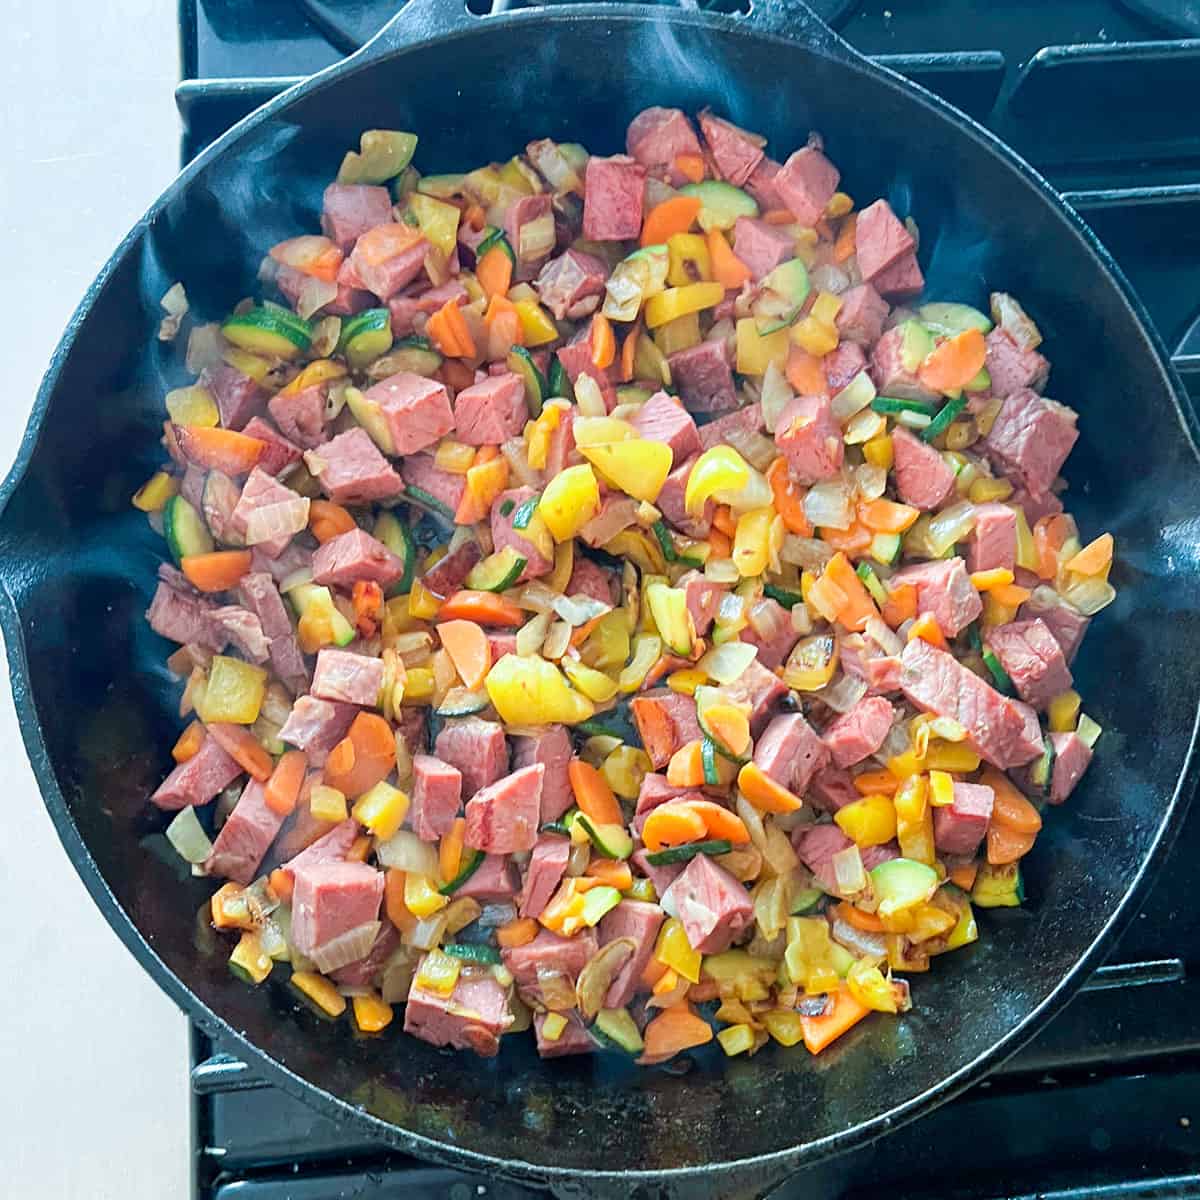 cubes of corned beef and sautéed veggies in a cast iron skillet.